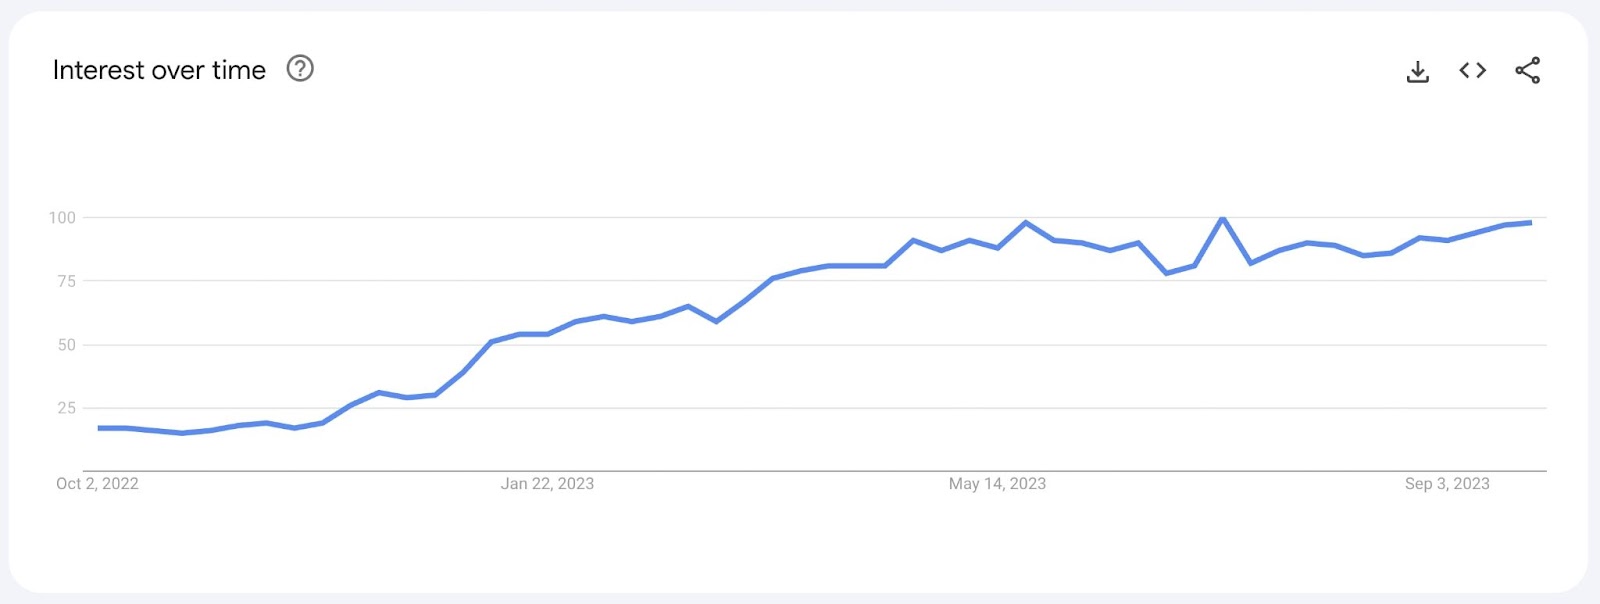 Google Trends "Interest over time" graph for "AI content" search term